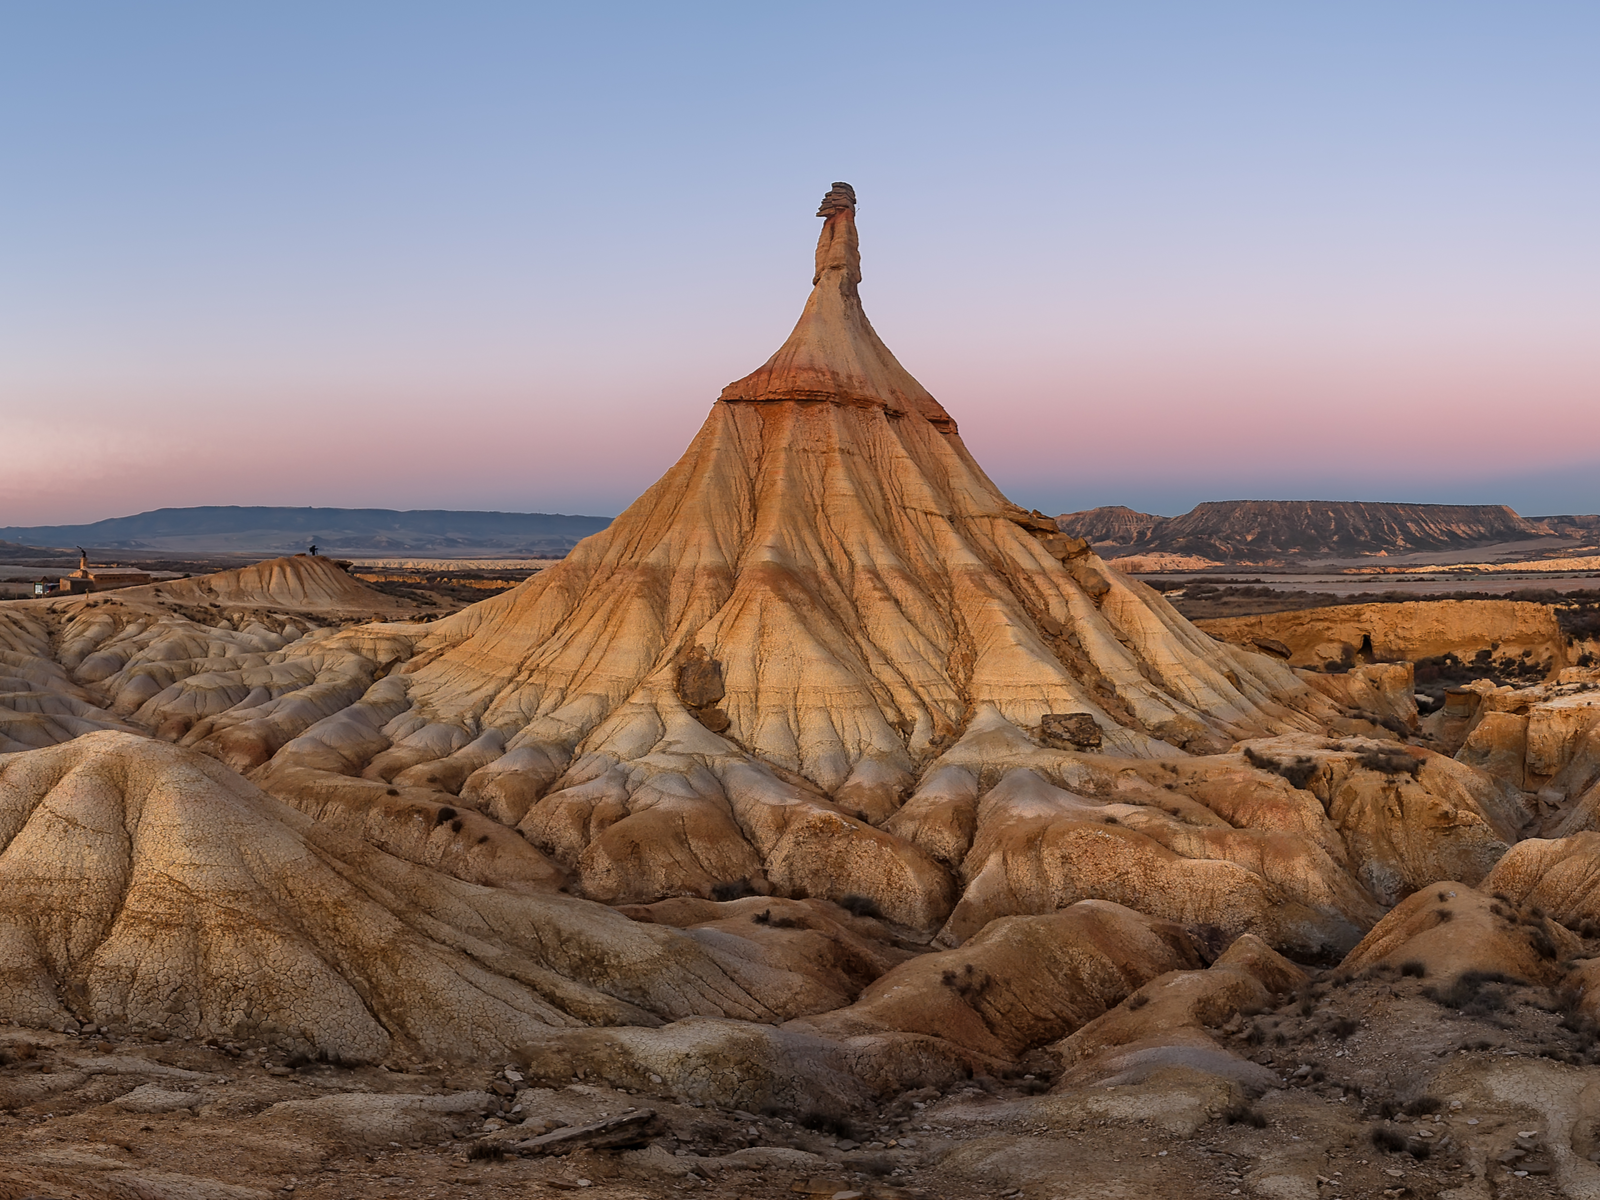 A magnificent natural rock formation at a desert region on Bardenas Reales Natural Park in Spain, one of many Game of Thrones filming locations you can visit